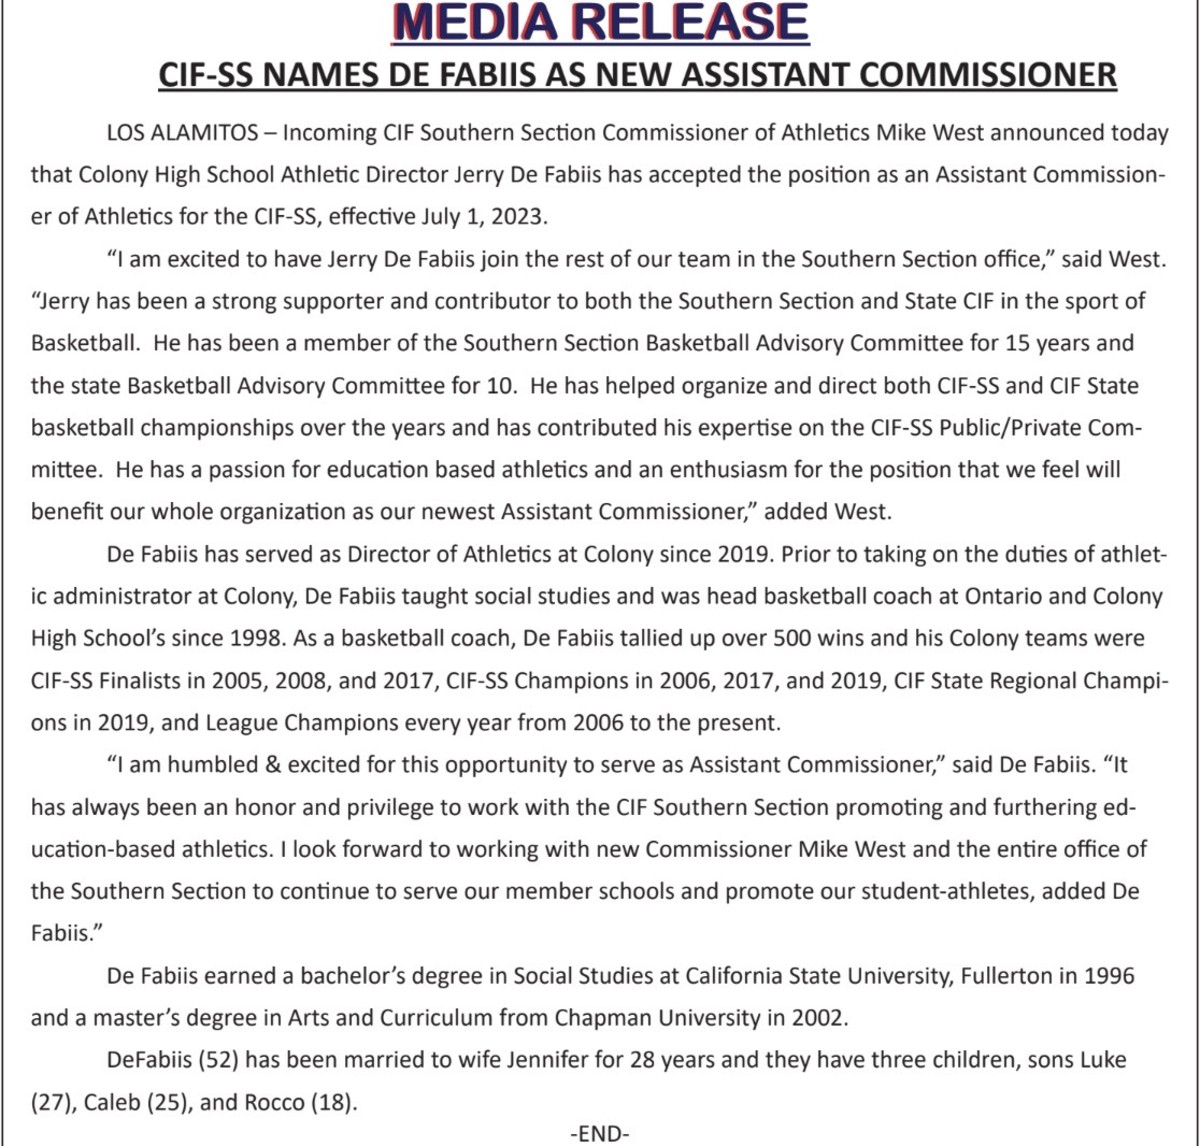 press release Jerry De Fabilis is new assistant commissioner of CIF Southern Section 6-9-23